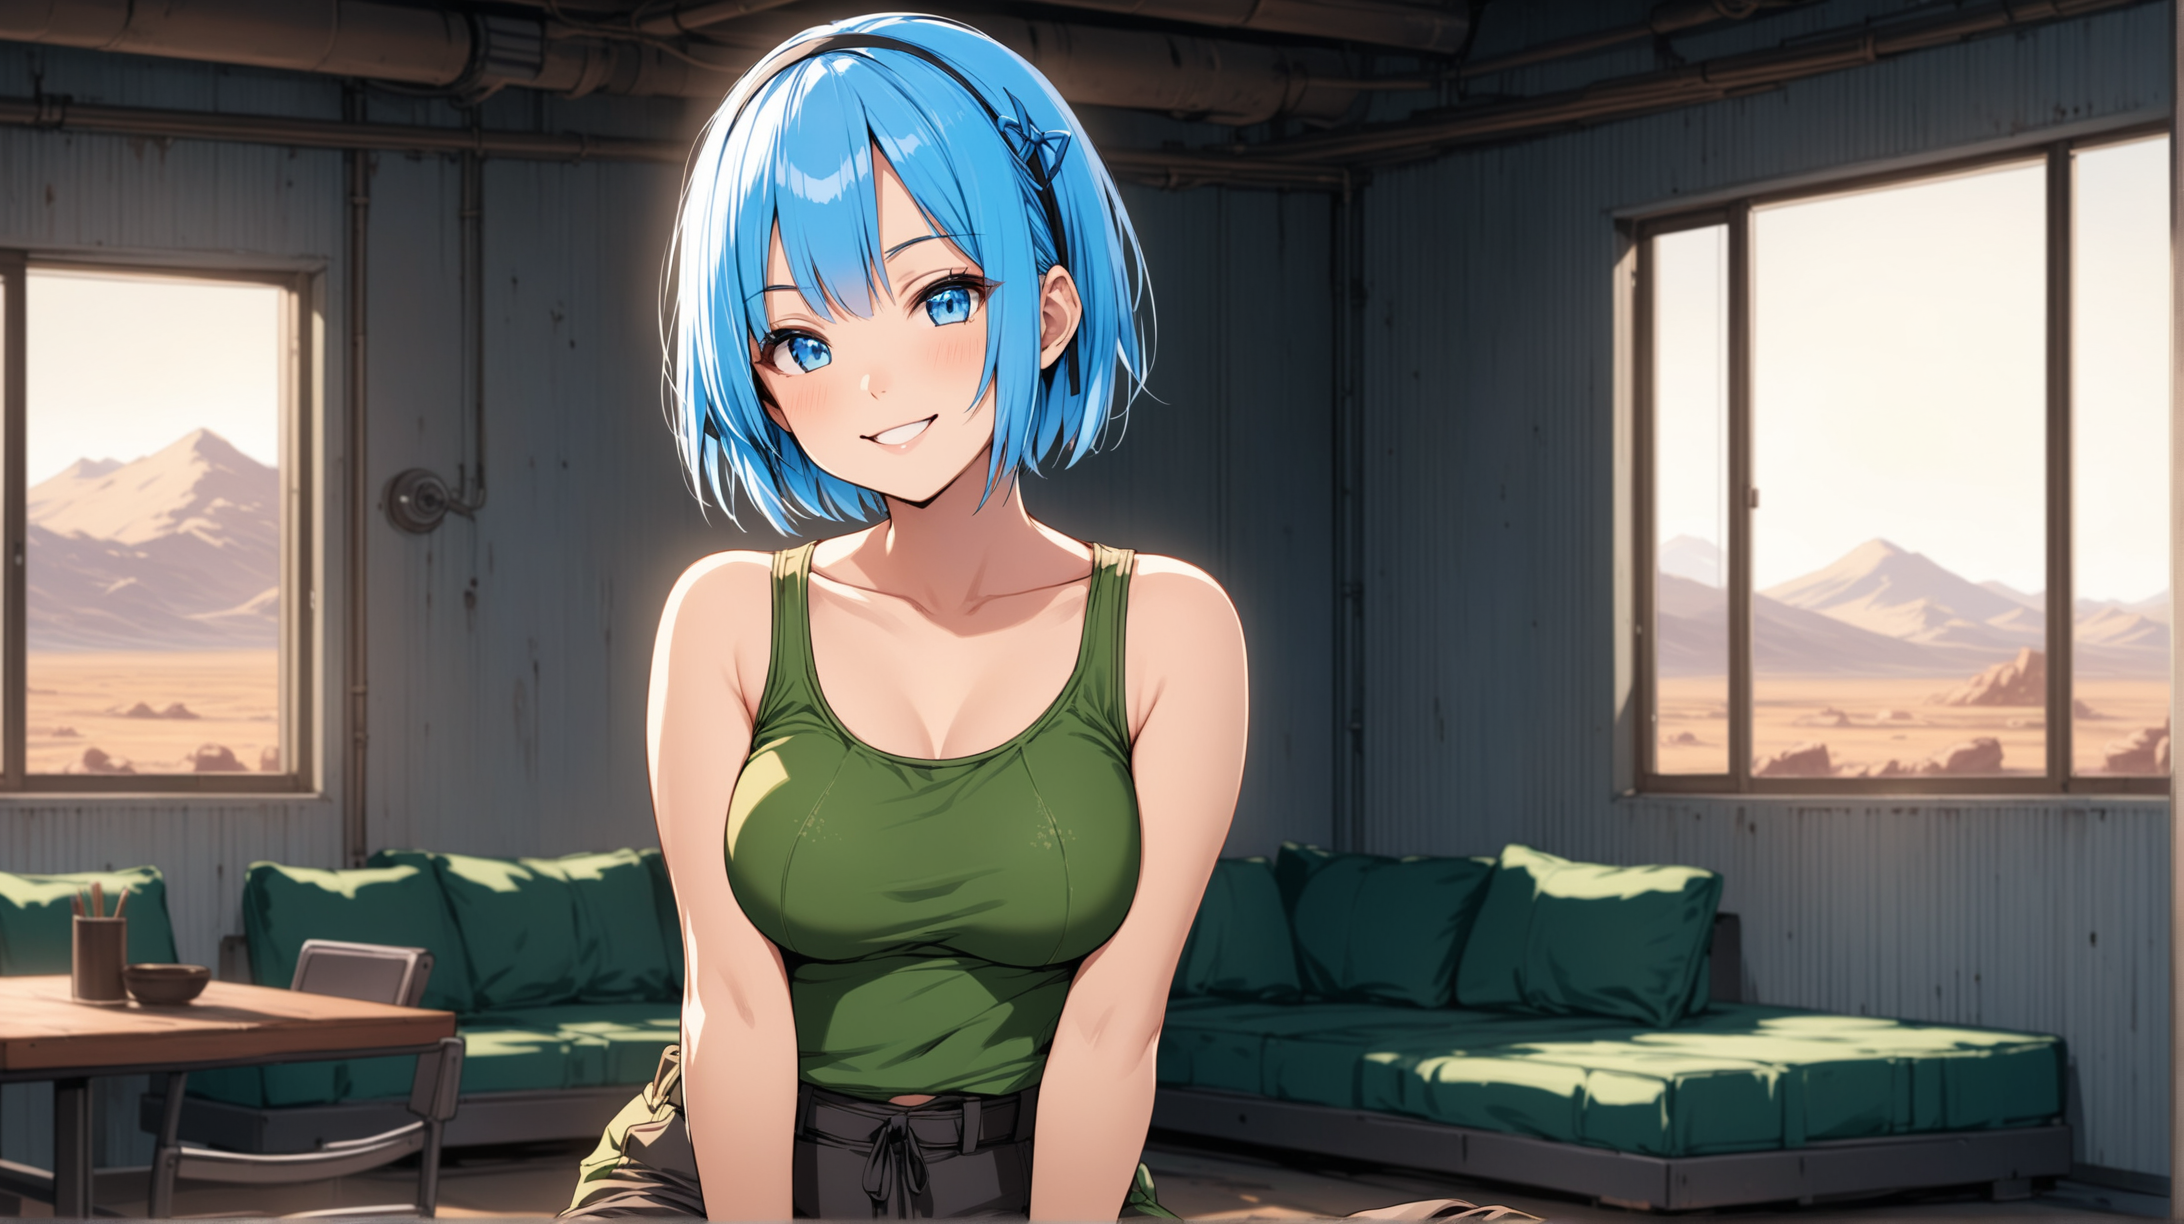 Draw the character Rem, high quality, in a relaxed pose, indoors, wearing an outfit inspired from the Fallout series, smiling at the viewer